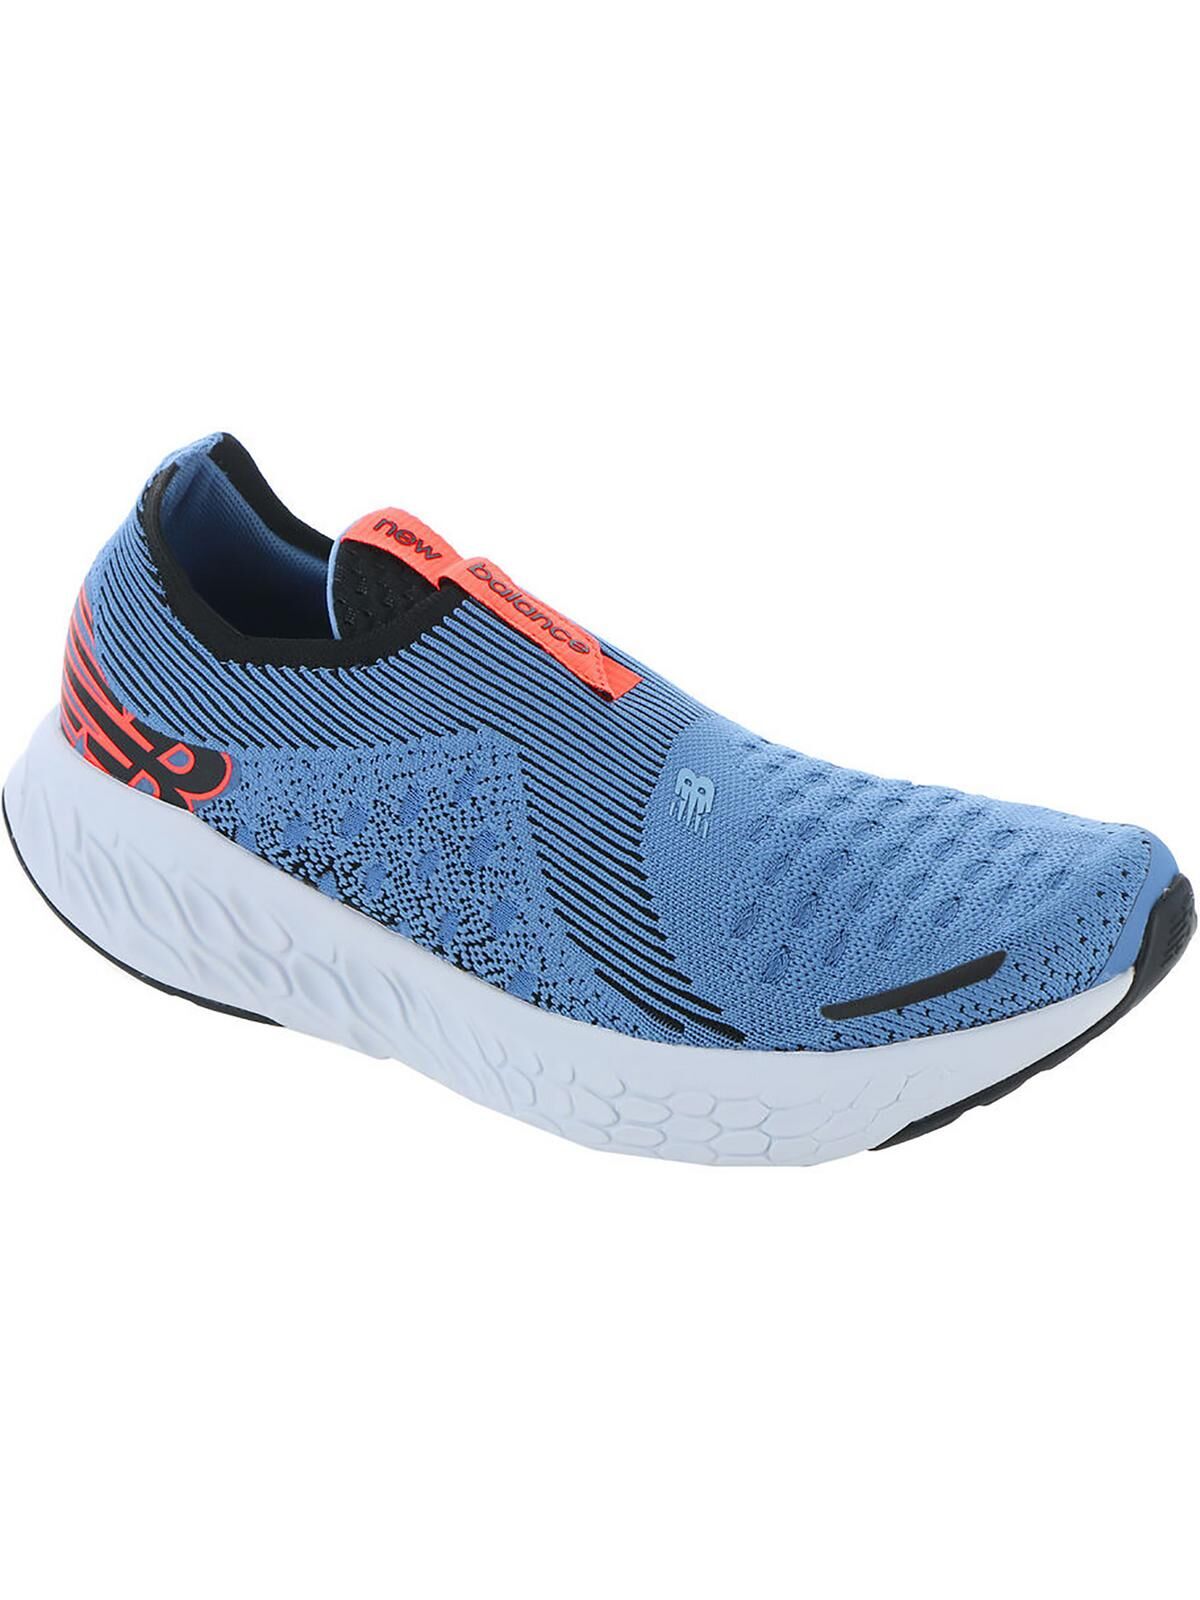 New Balance Mens Fitness Workout Slip-On Sneakers US 8 male